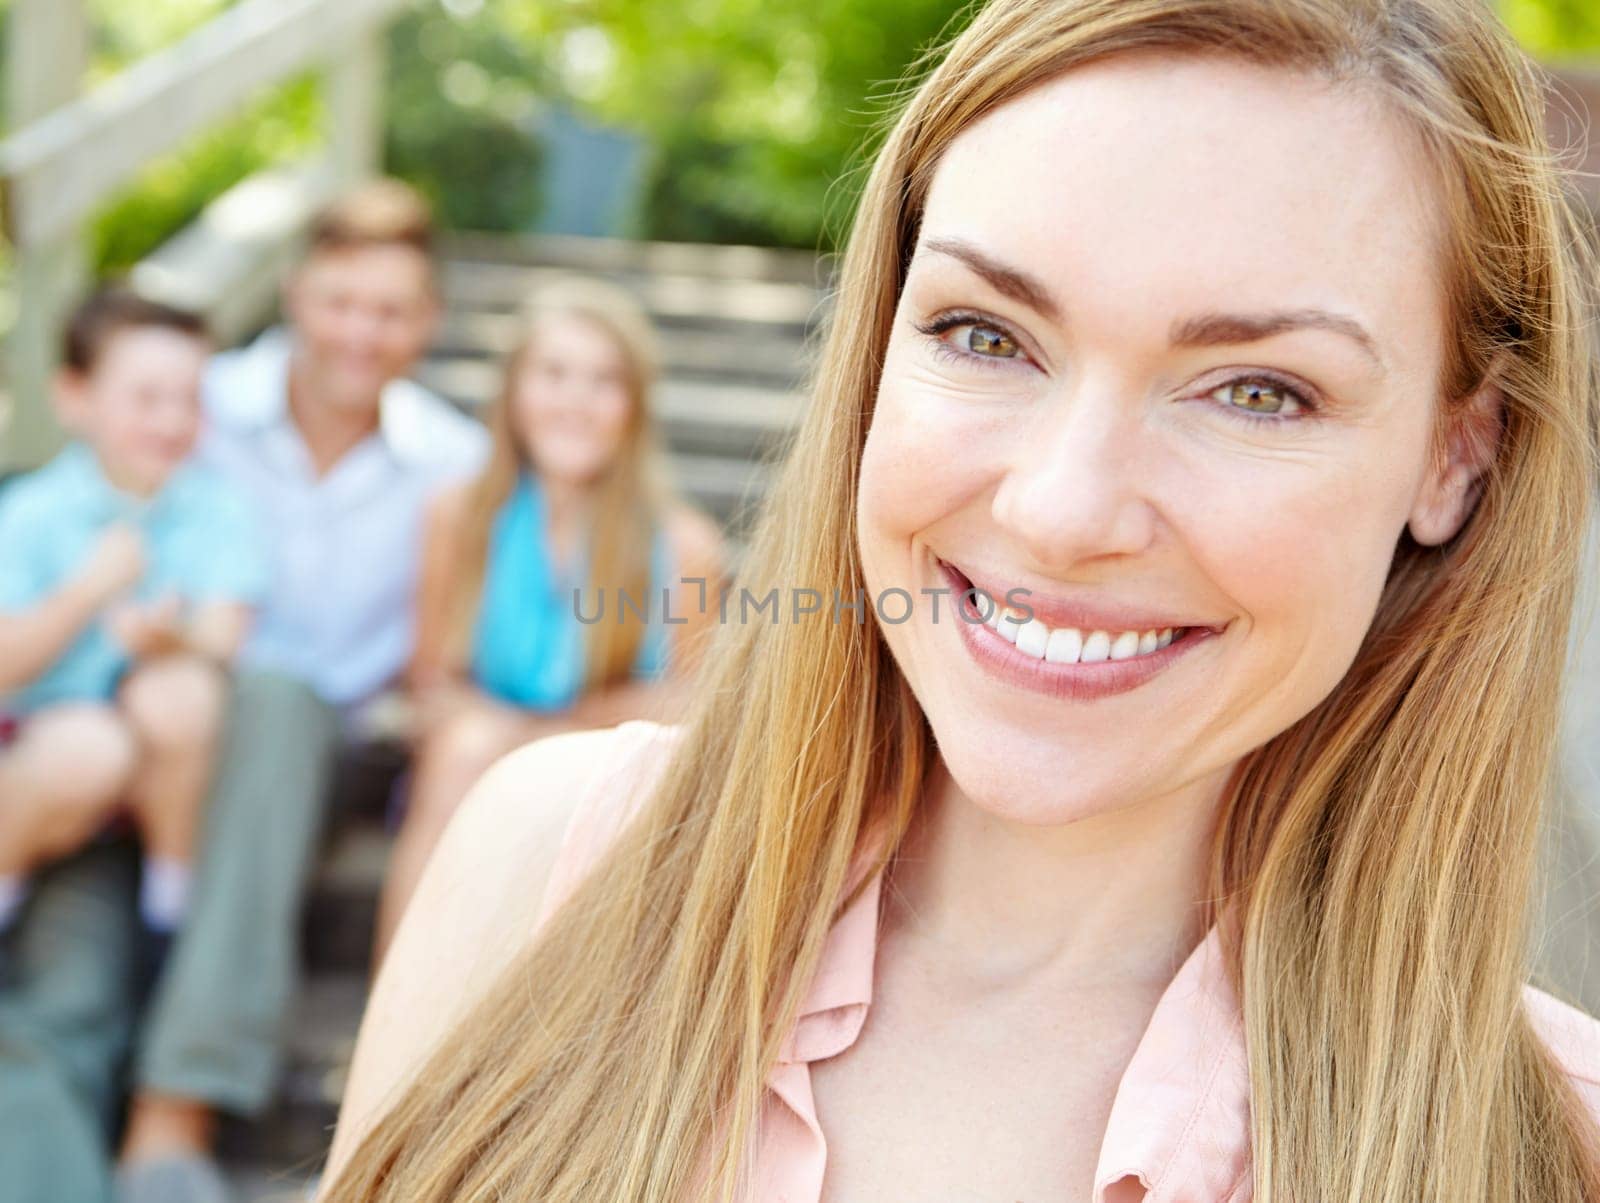 The family matriarch. Smiling attractive mother with family sitting behind her while outdoors